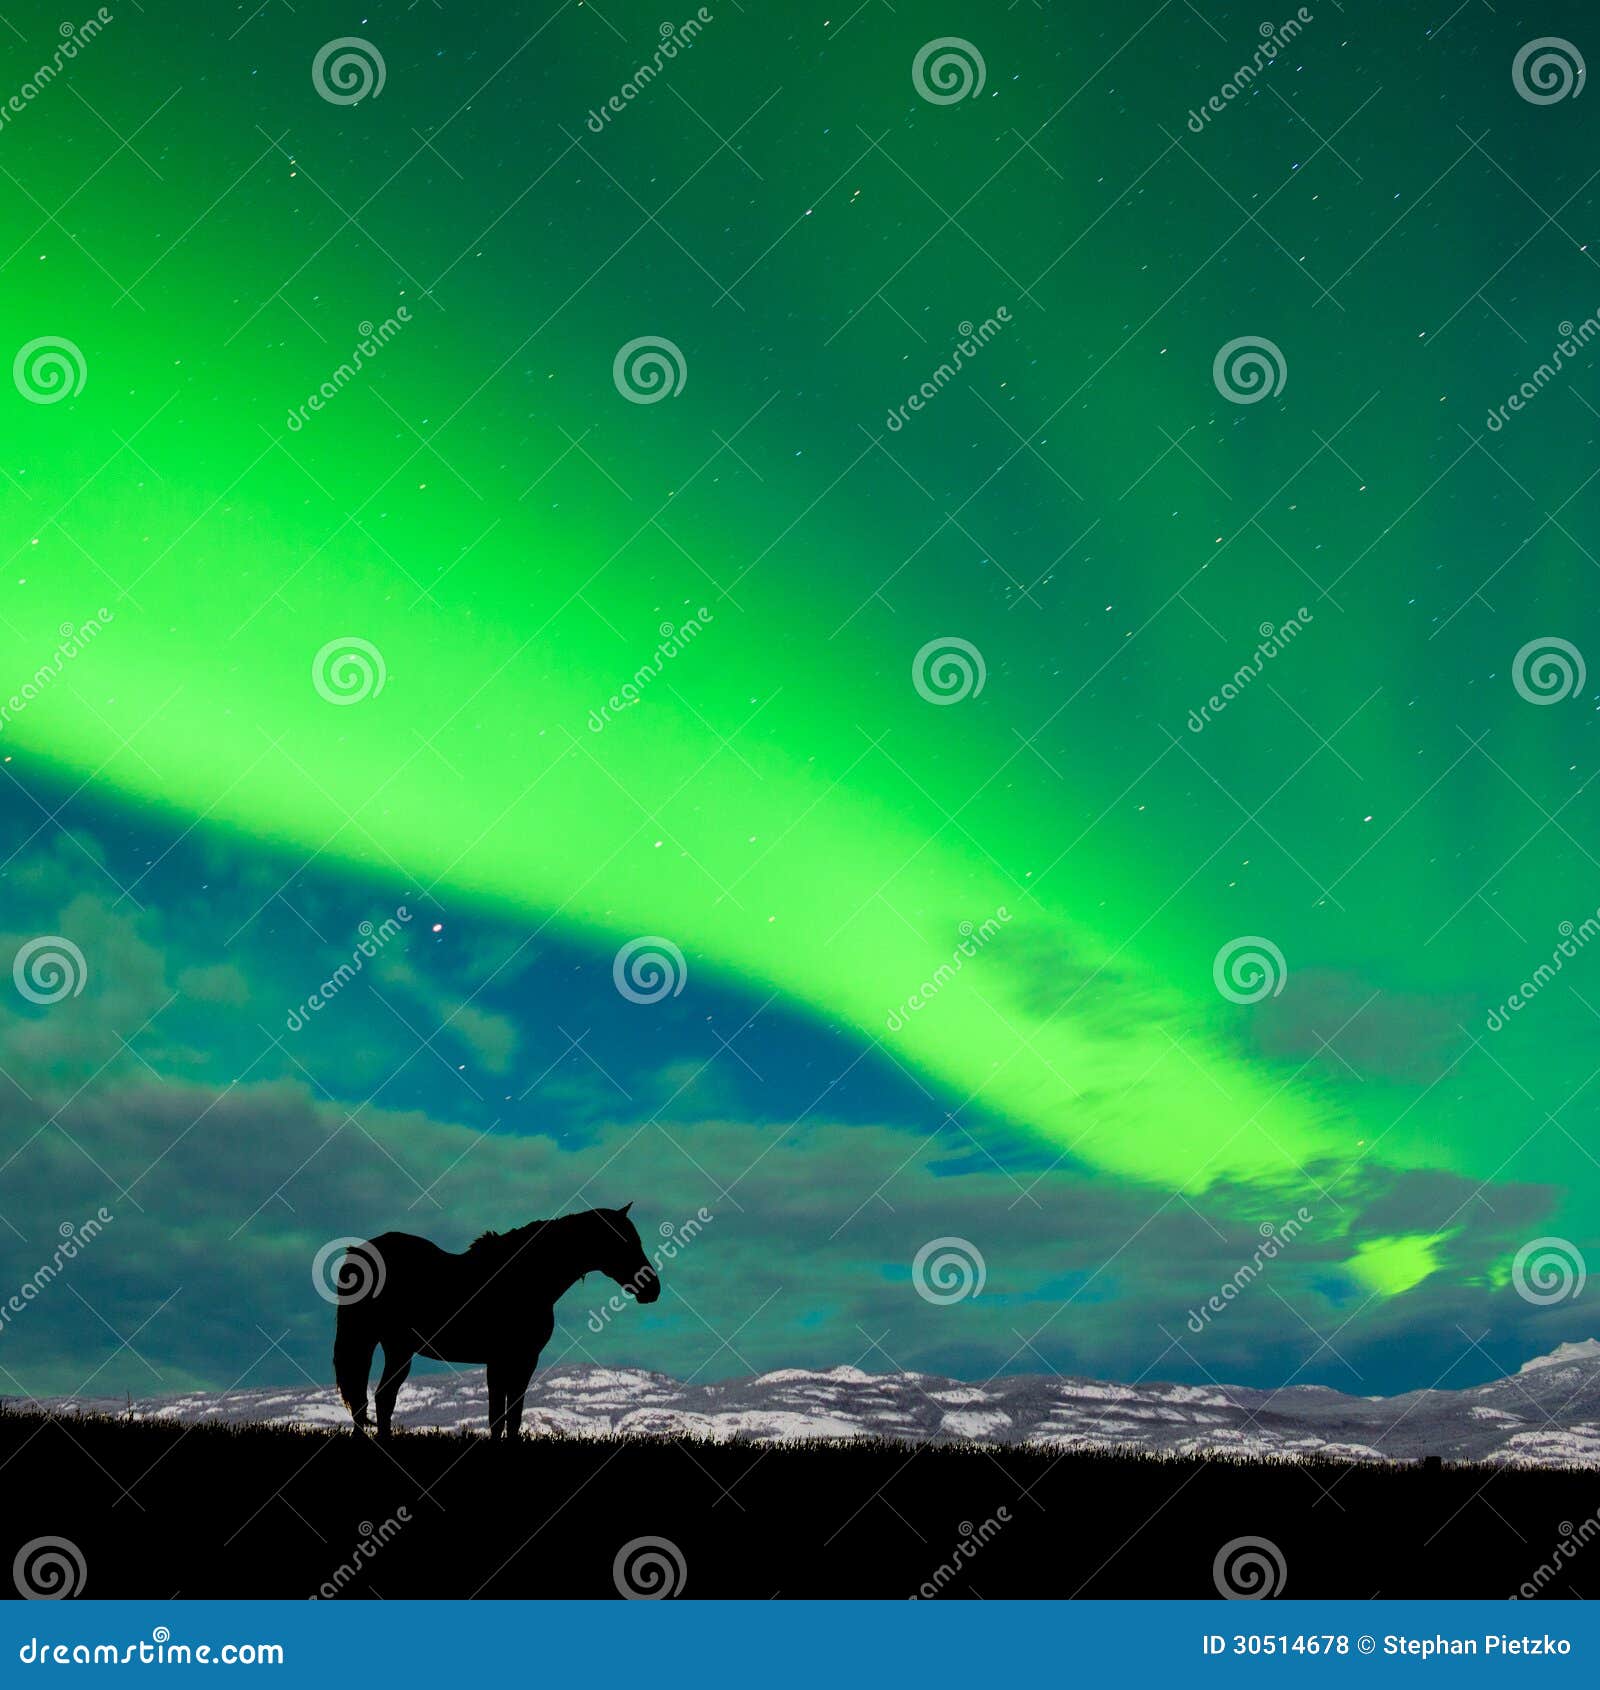 horse distant snowy peaks with northern lights sky